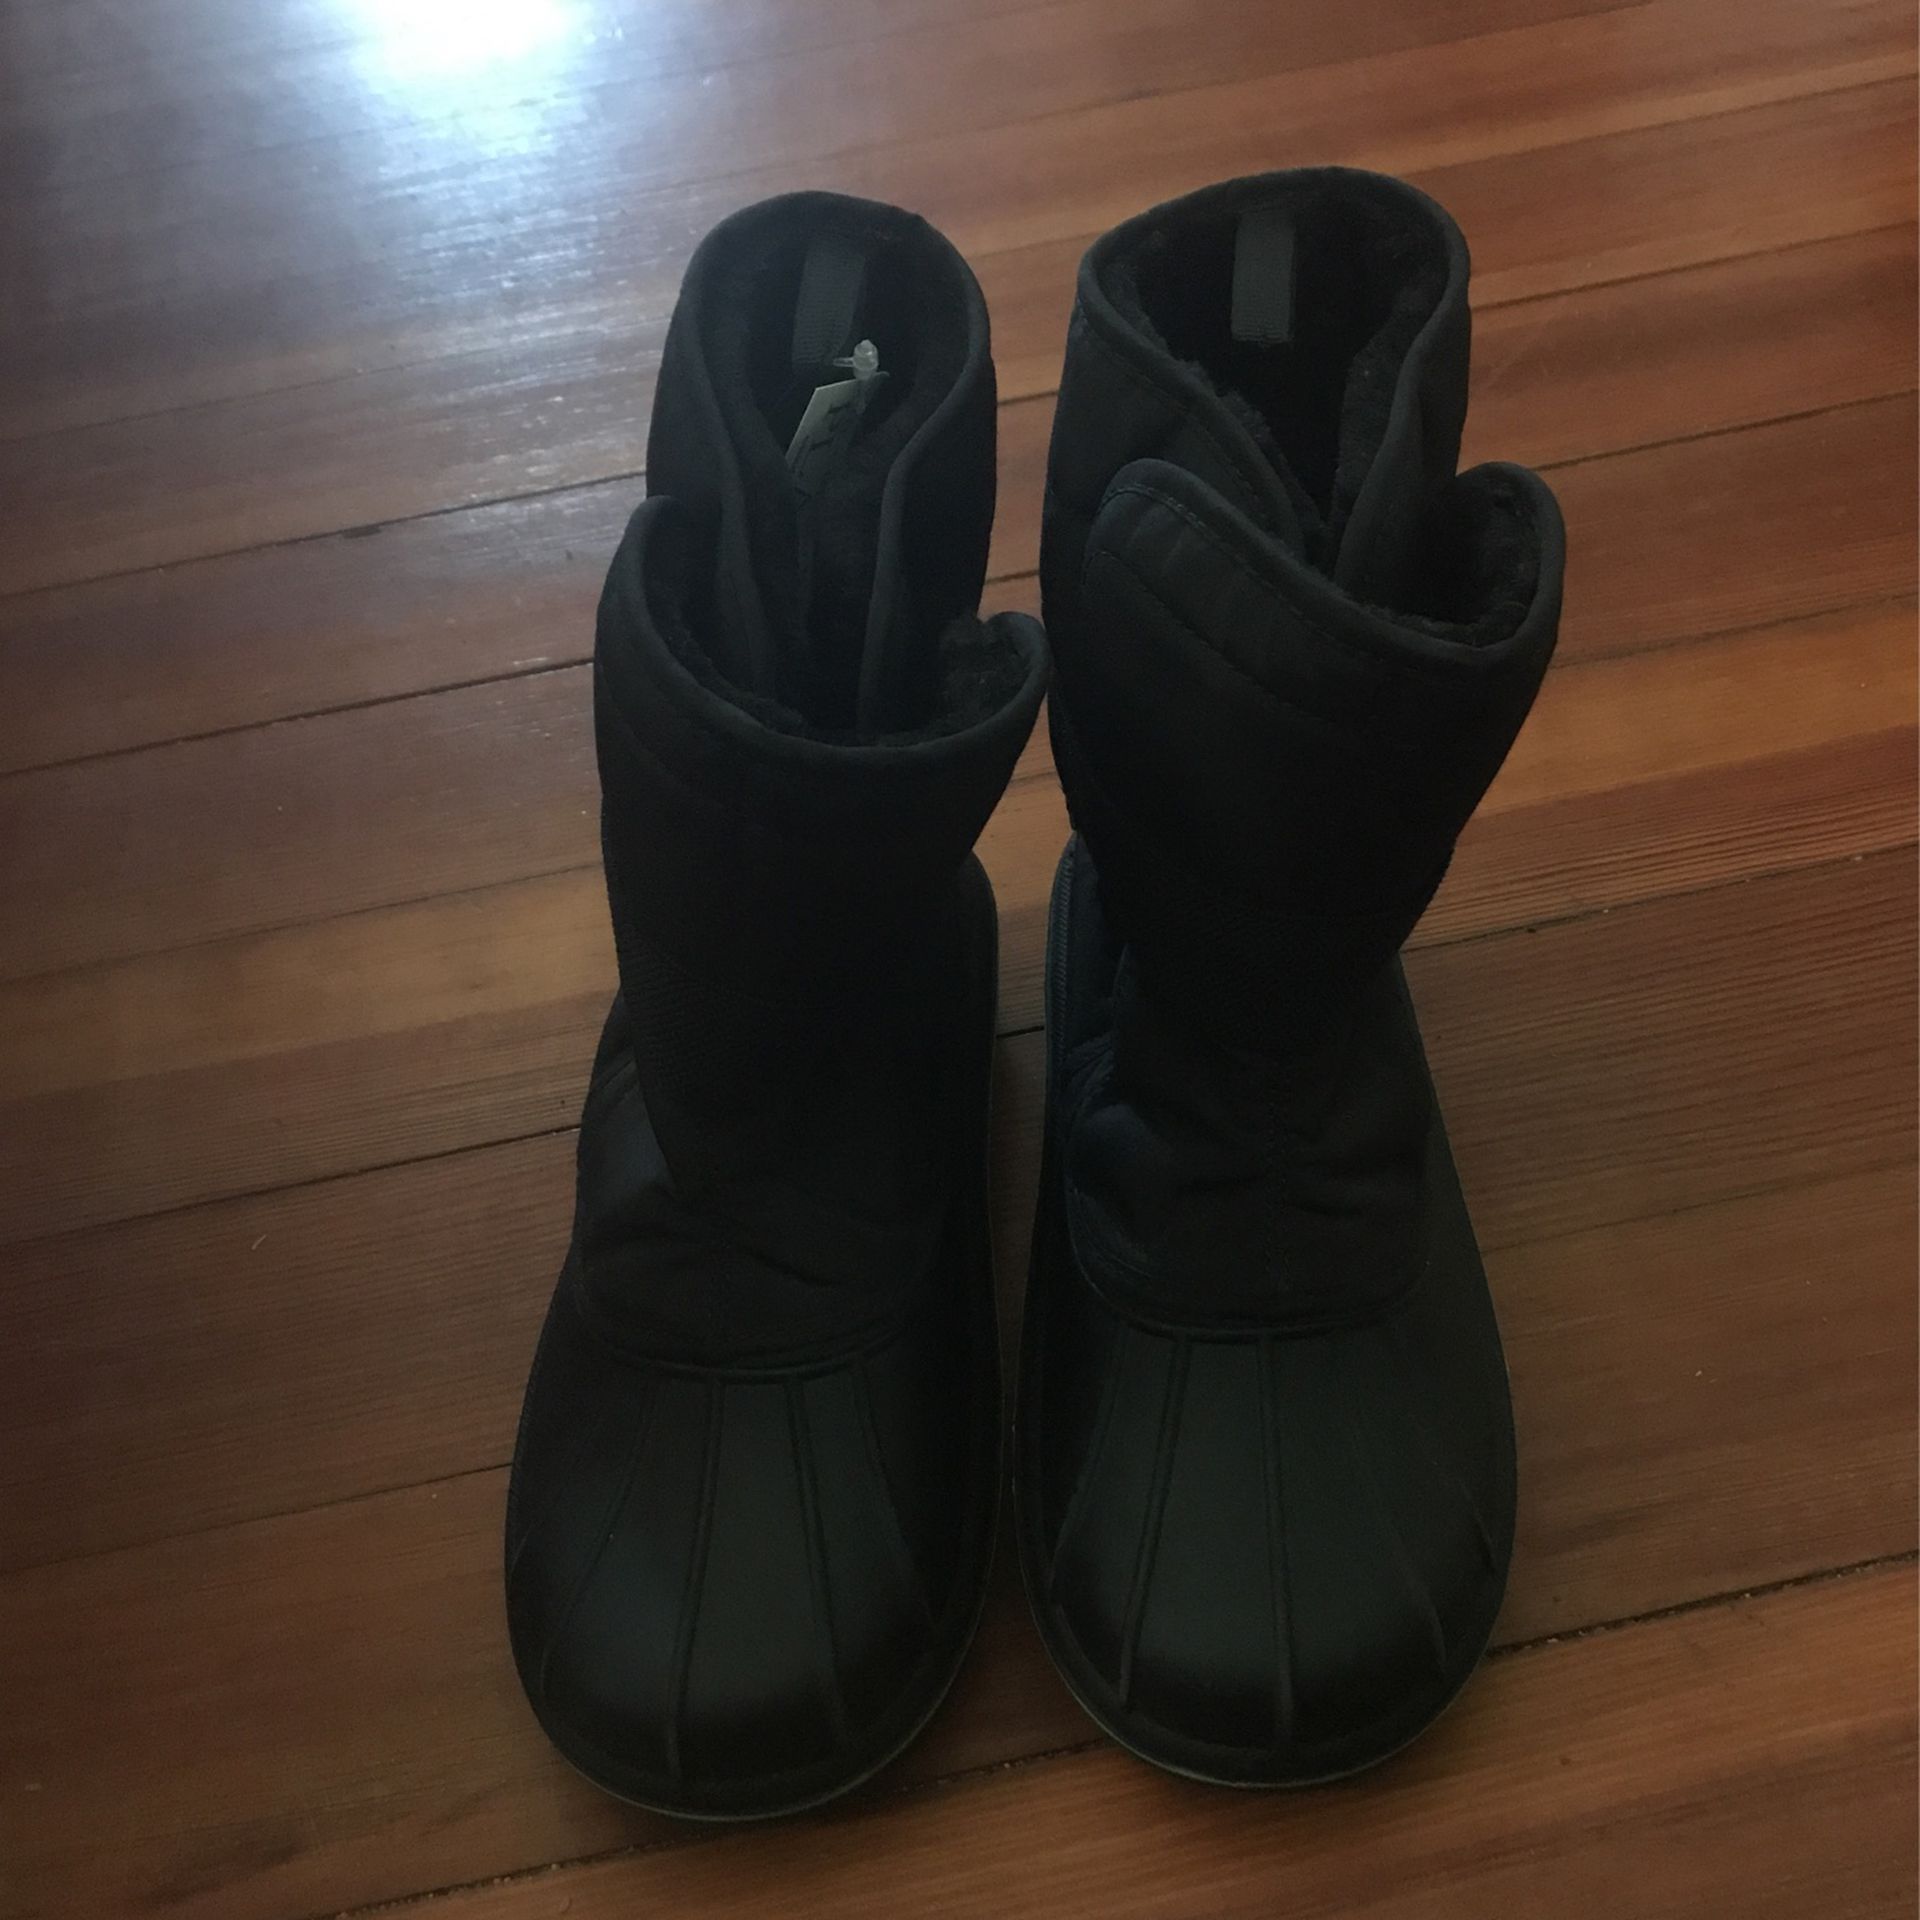 New Never Used Size 2 Snow Boots $15 OBO